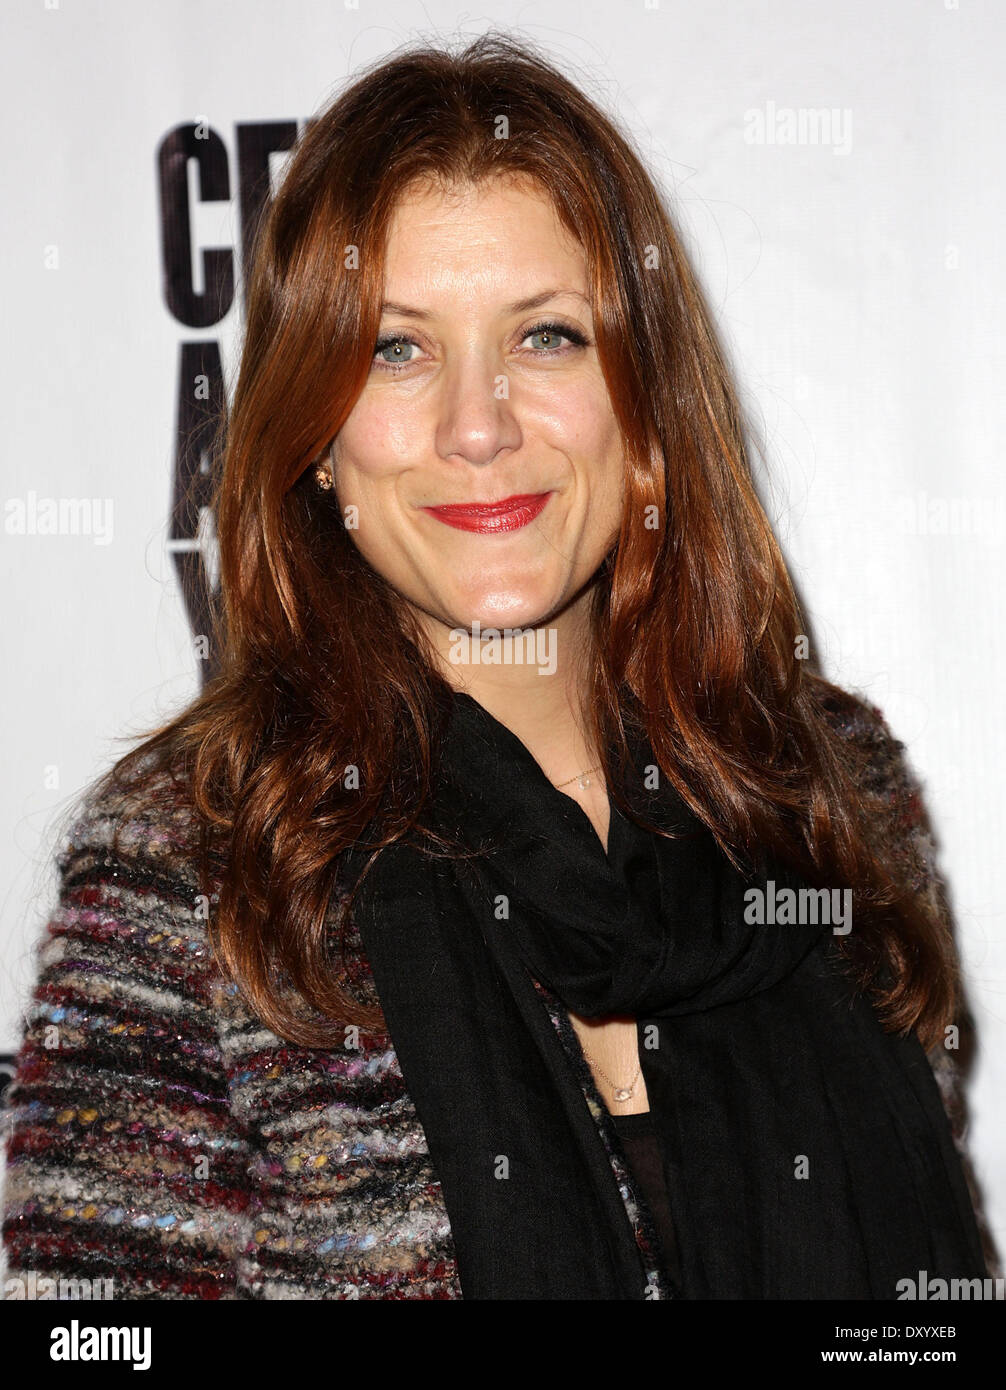 The Los Angeles premiere of 'Certainty' at Laemmle Music Hall - Arrivals Featuring: Kate Walsh Where: Los Angeles California USA When: 27 Nov 2012 Stock Photo